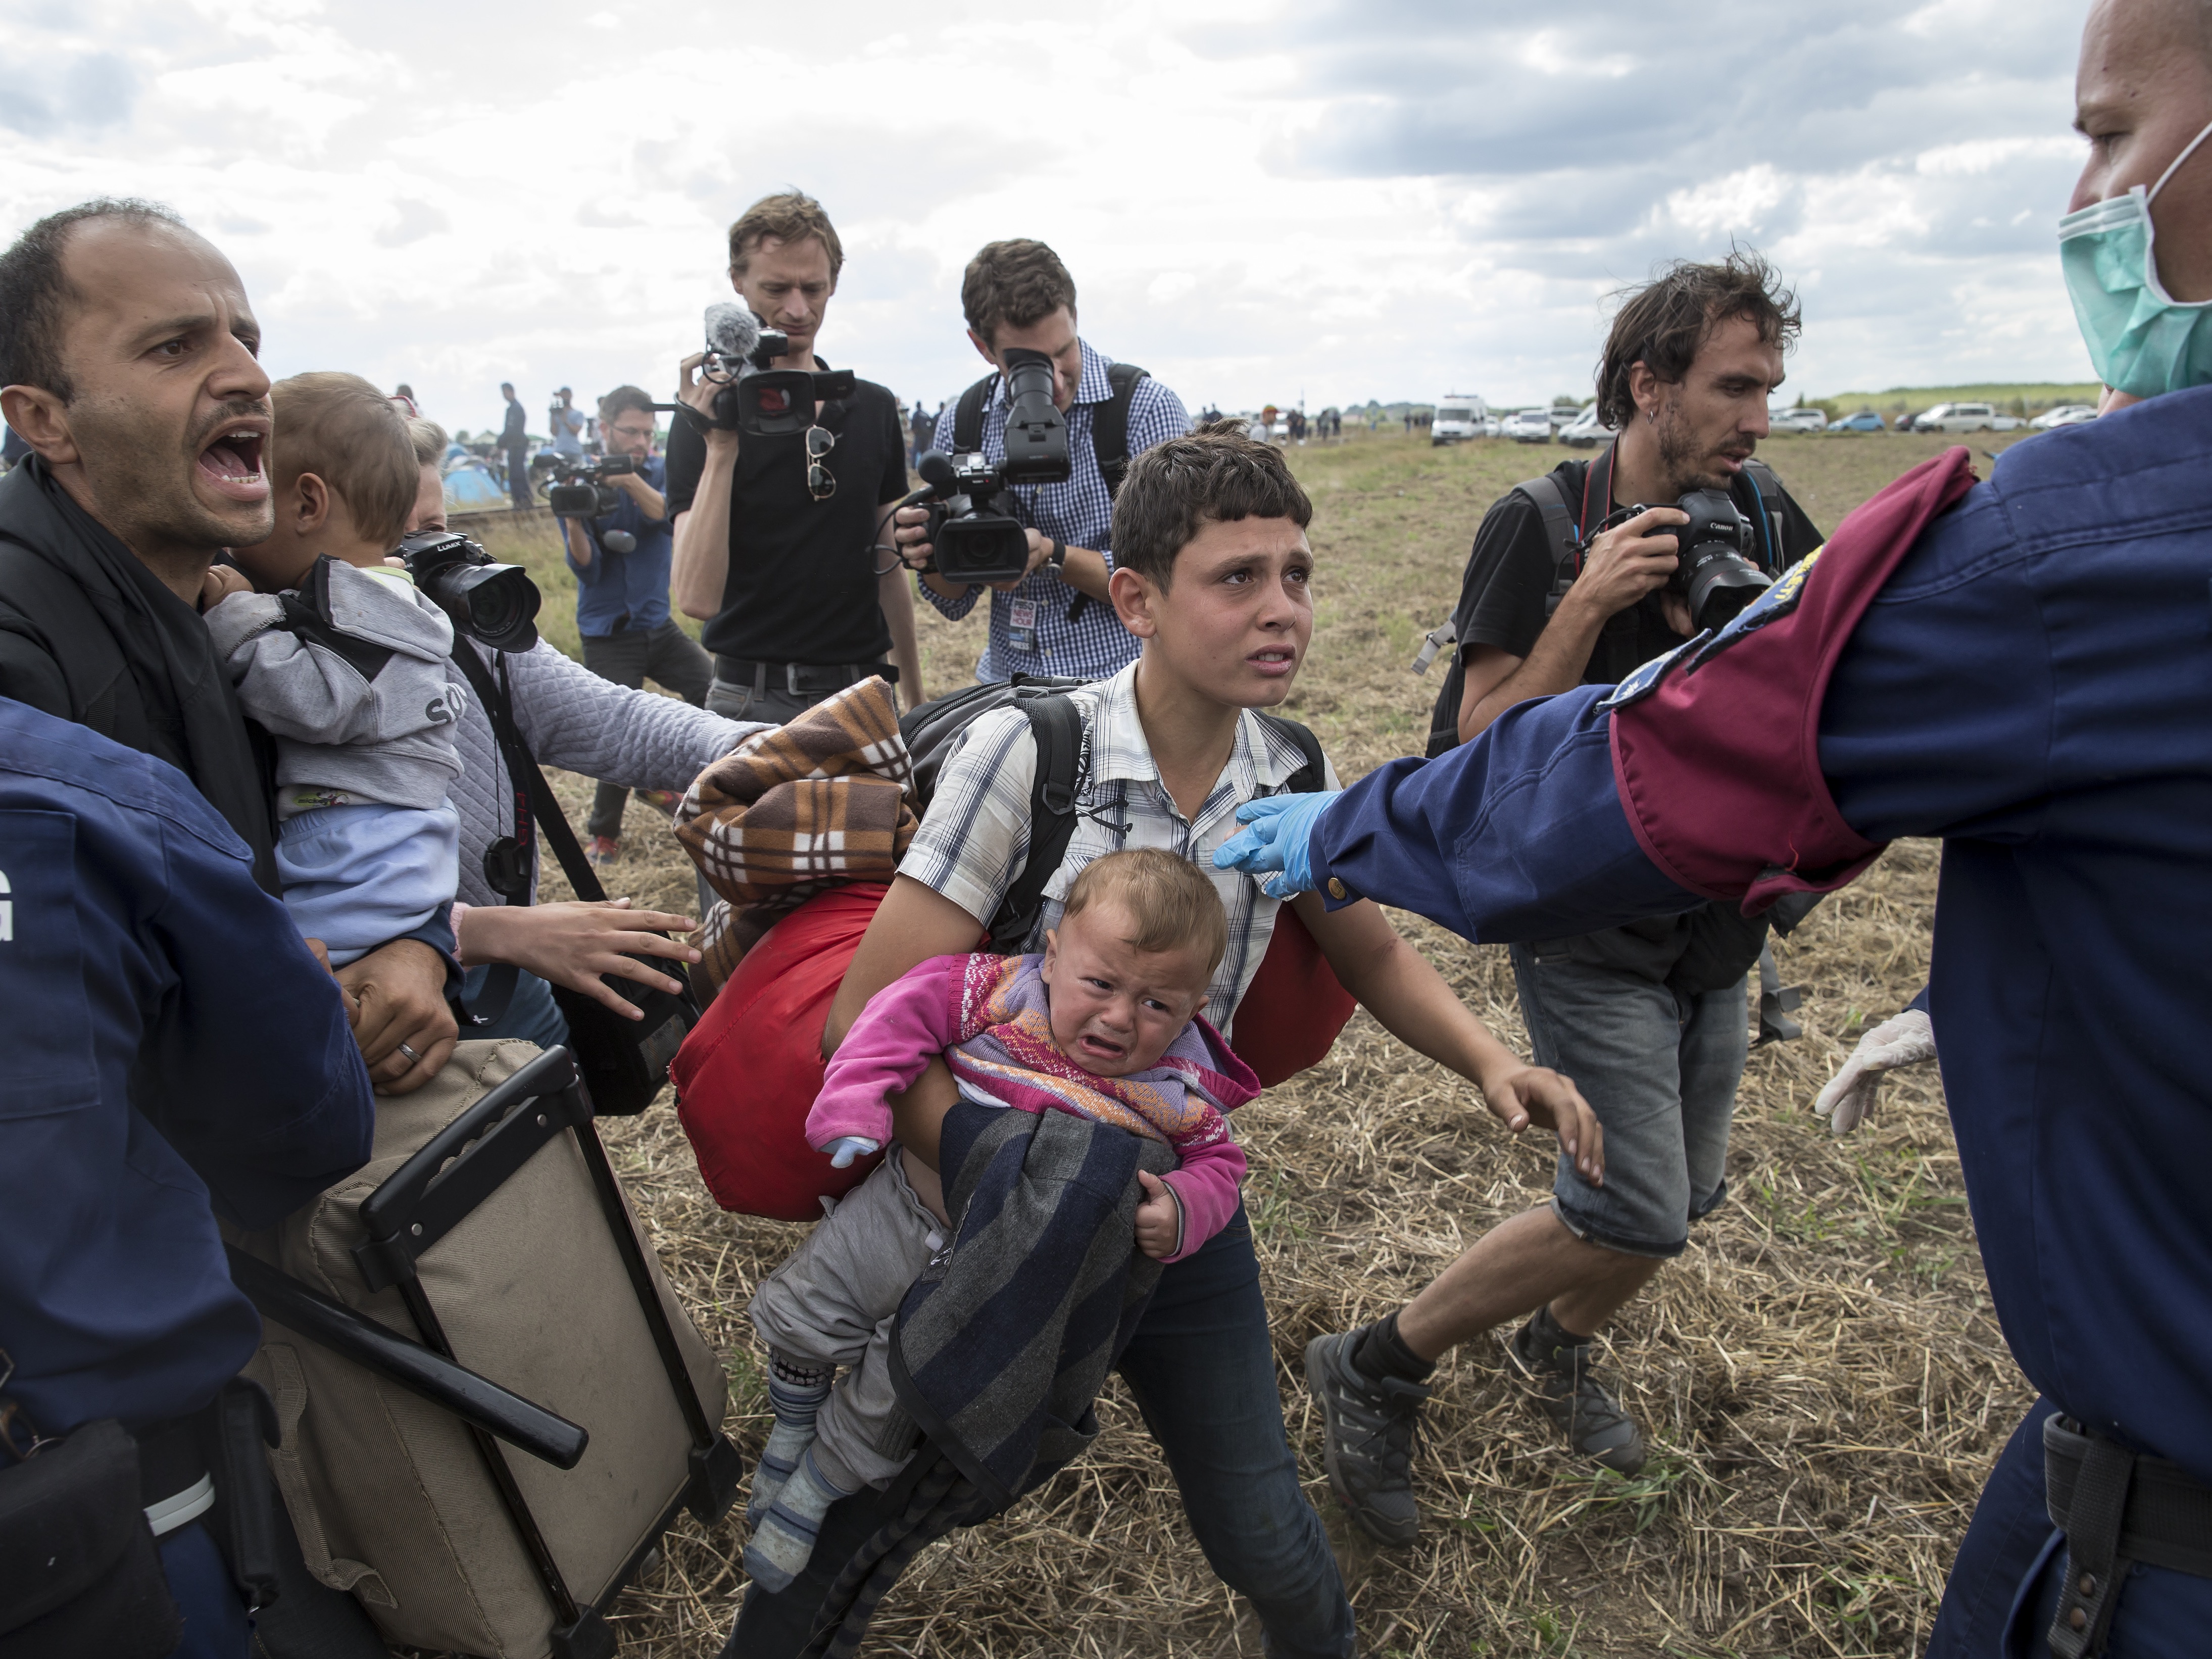 A migrant carrying a baby is stopped by Hungarian police officers as he tries to escape on a field nearby a collection point in the village of Roszke, Hungary, 8 September 2015